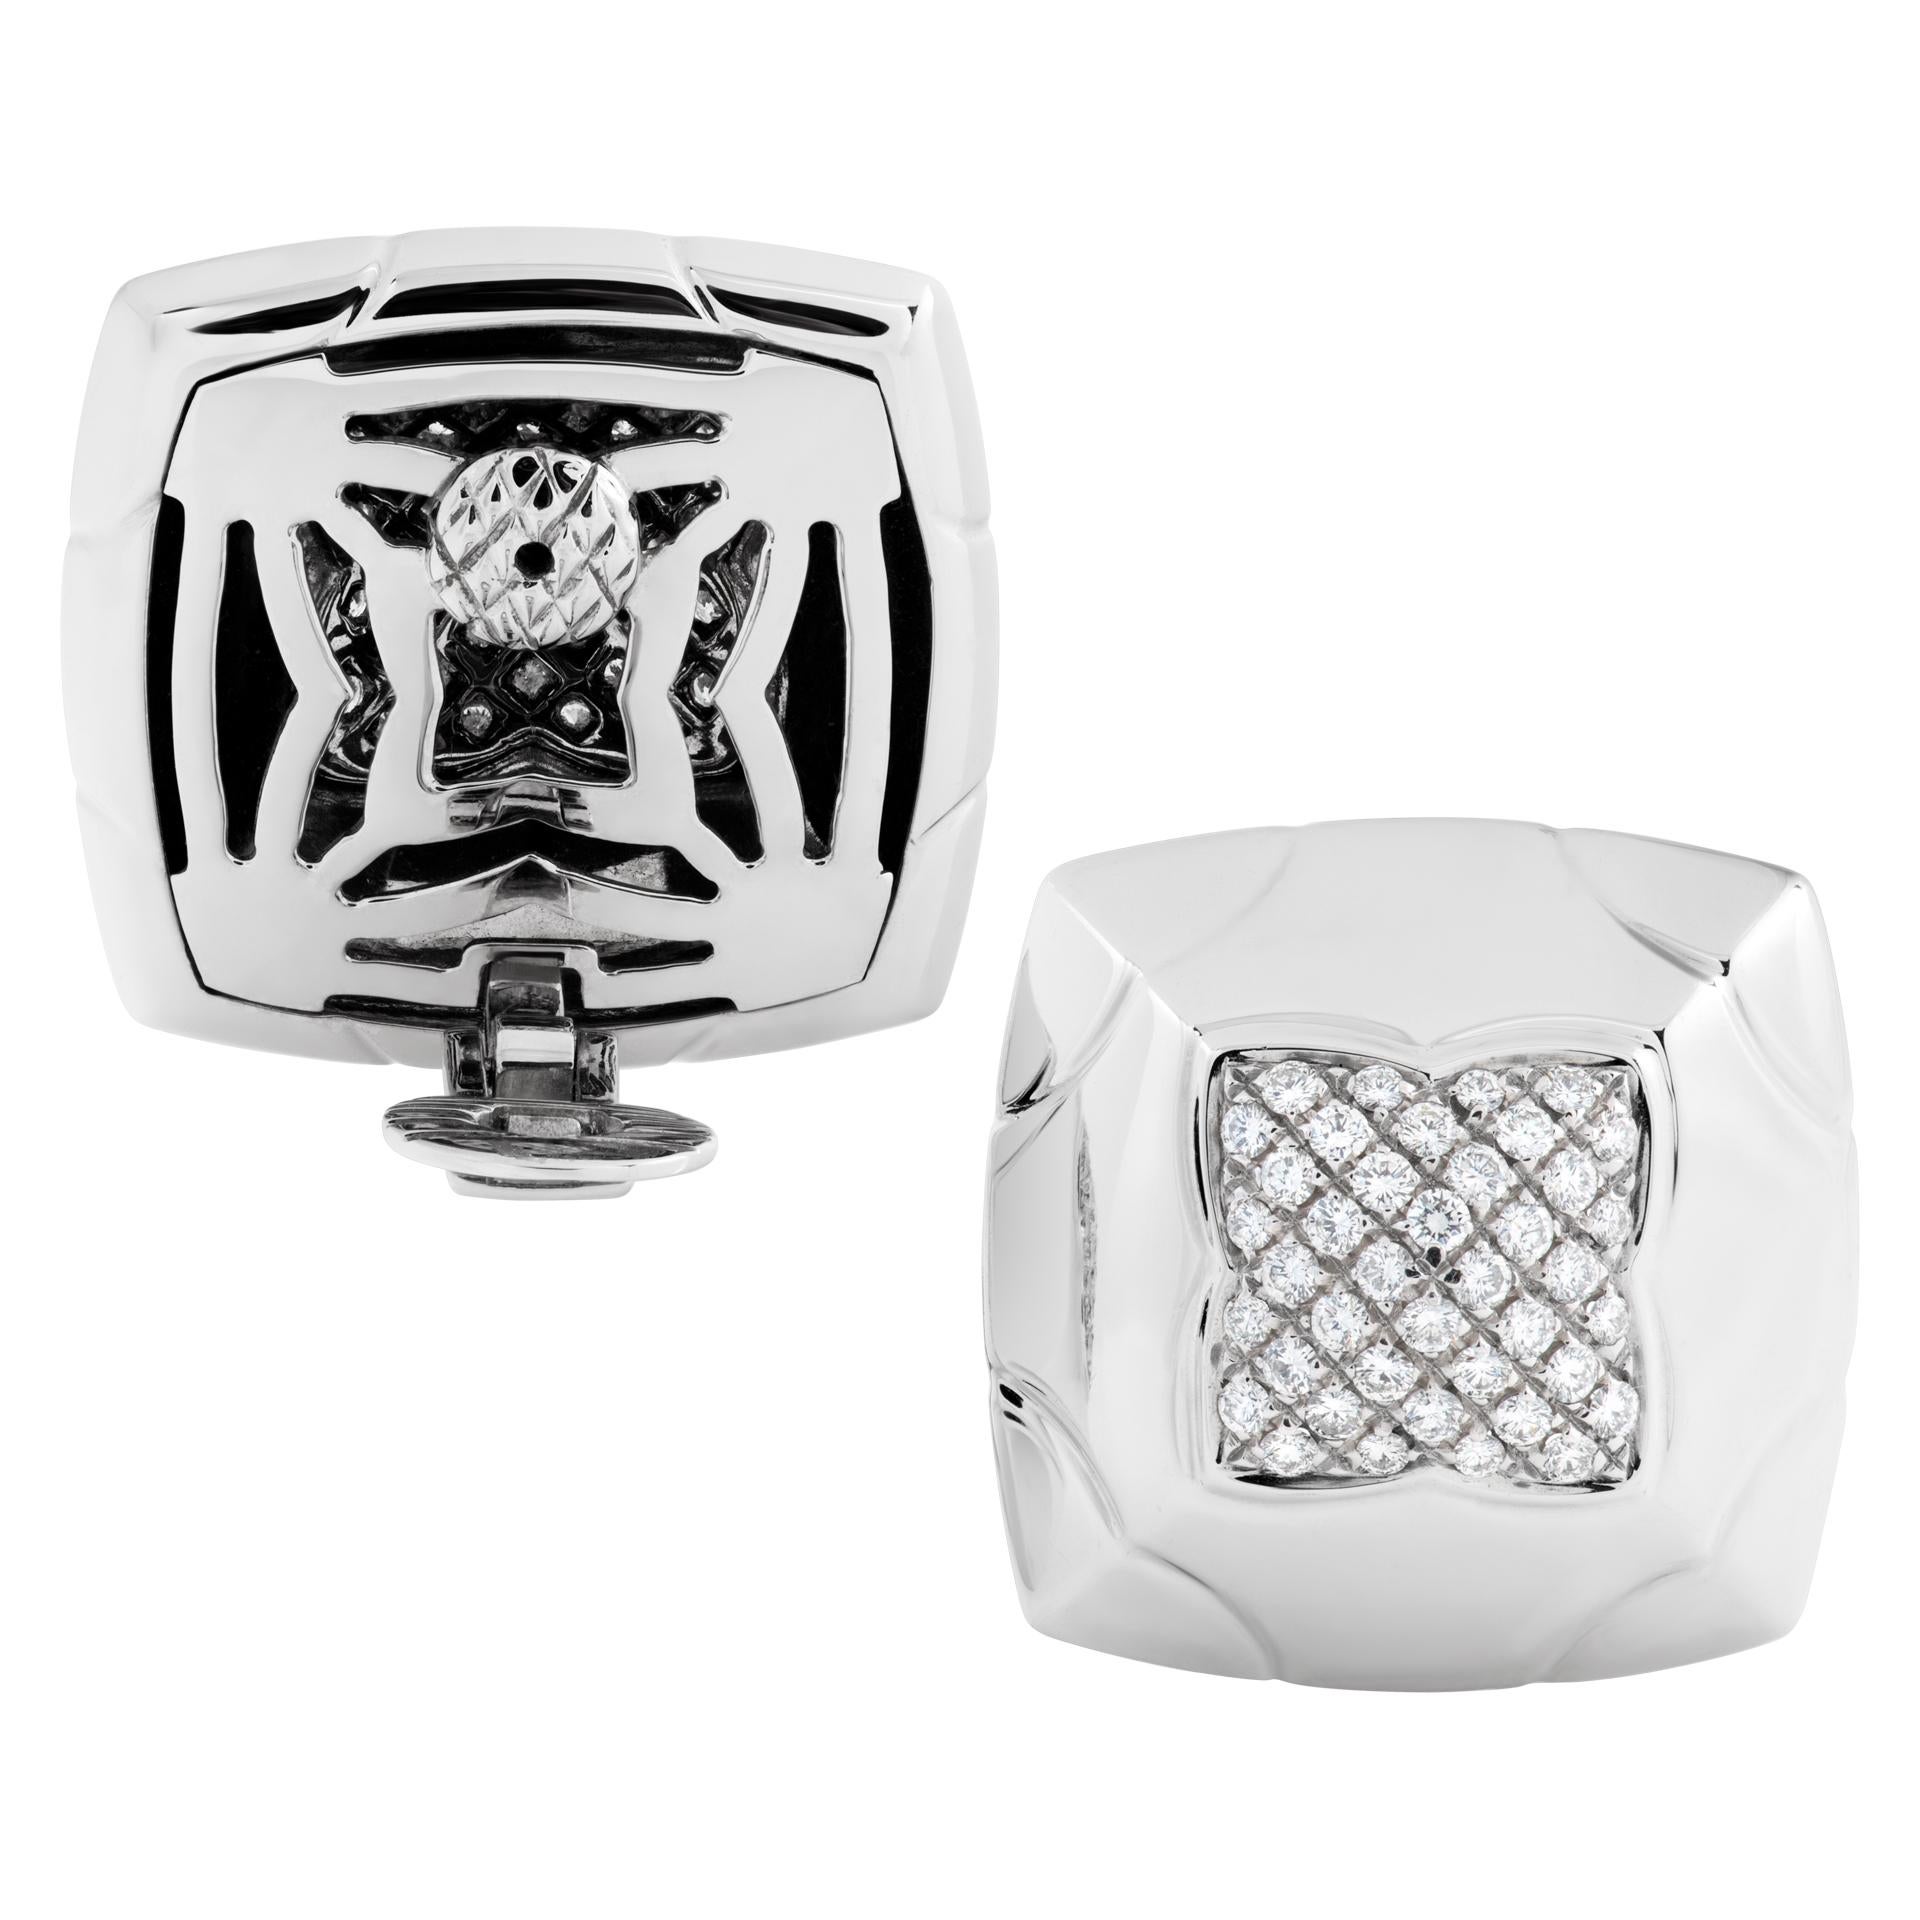 Women's Bvlgari Piramide Earrings in 18k White Gold with 1.52 Carats in Pave Diamonds